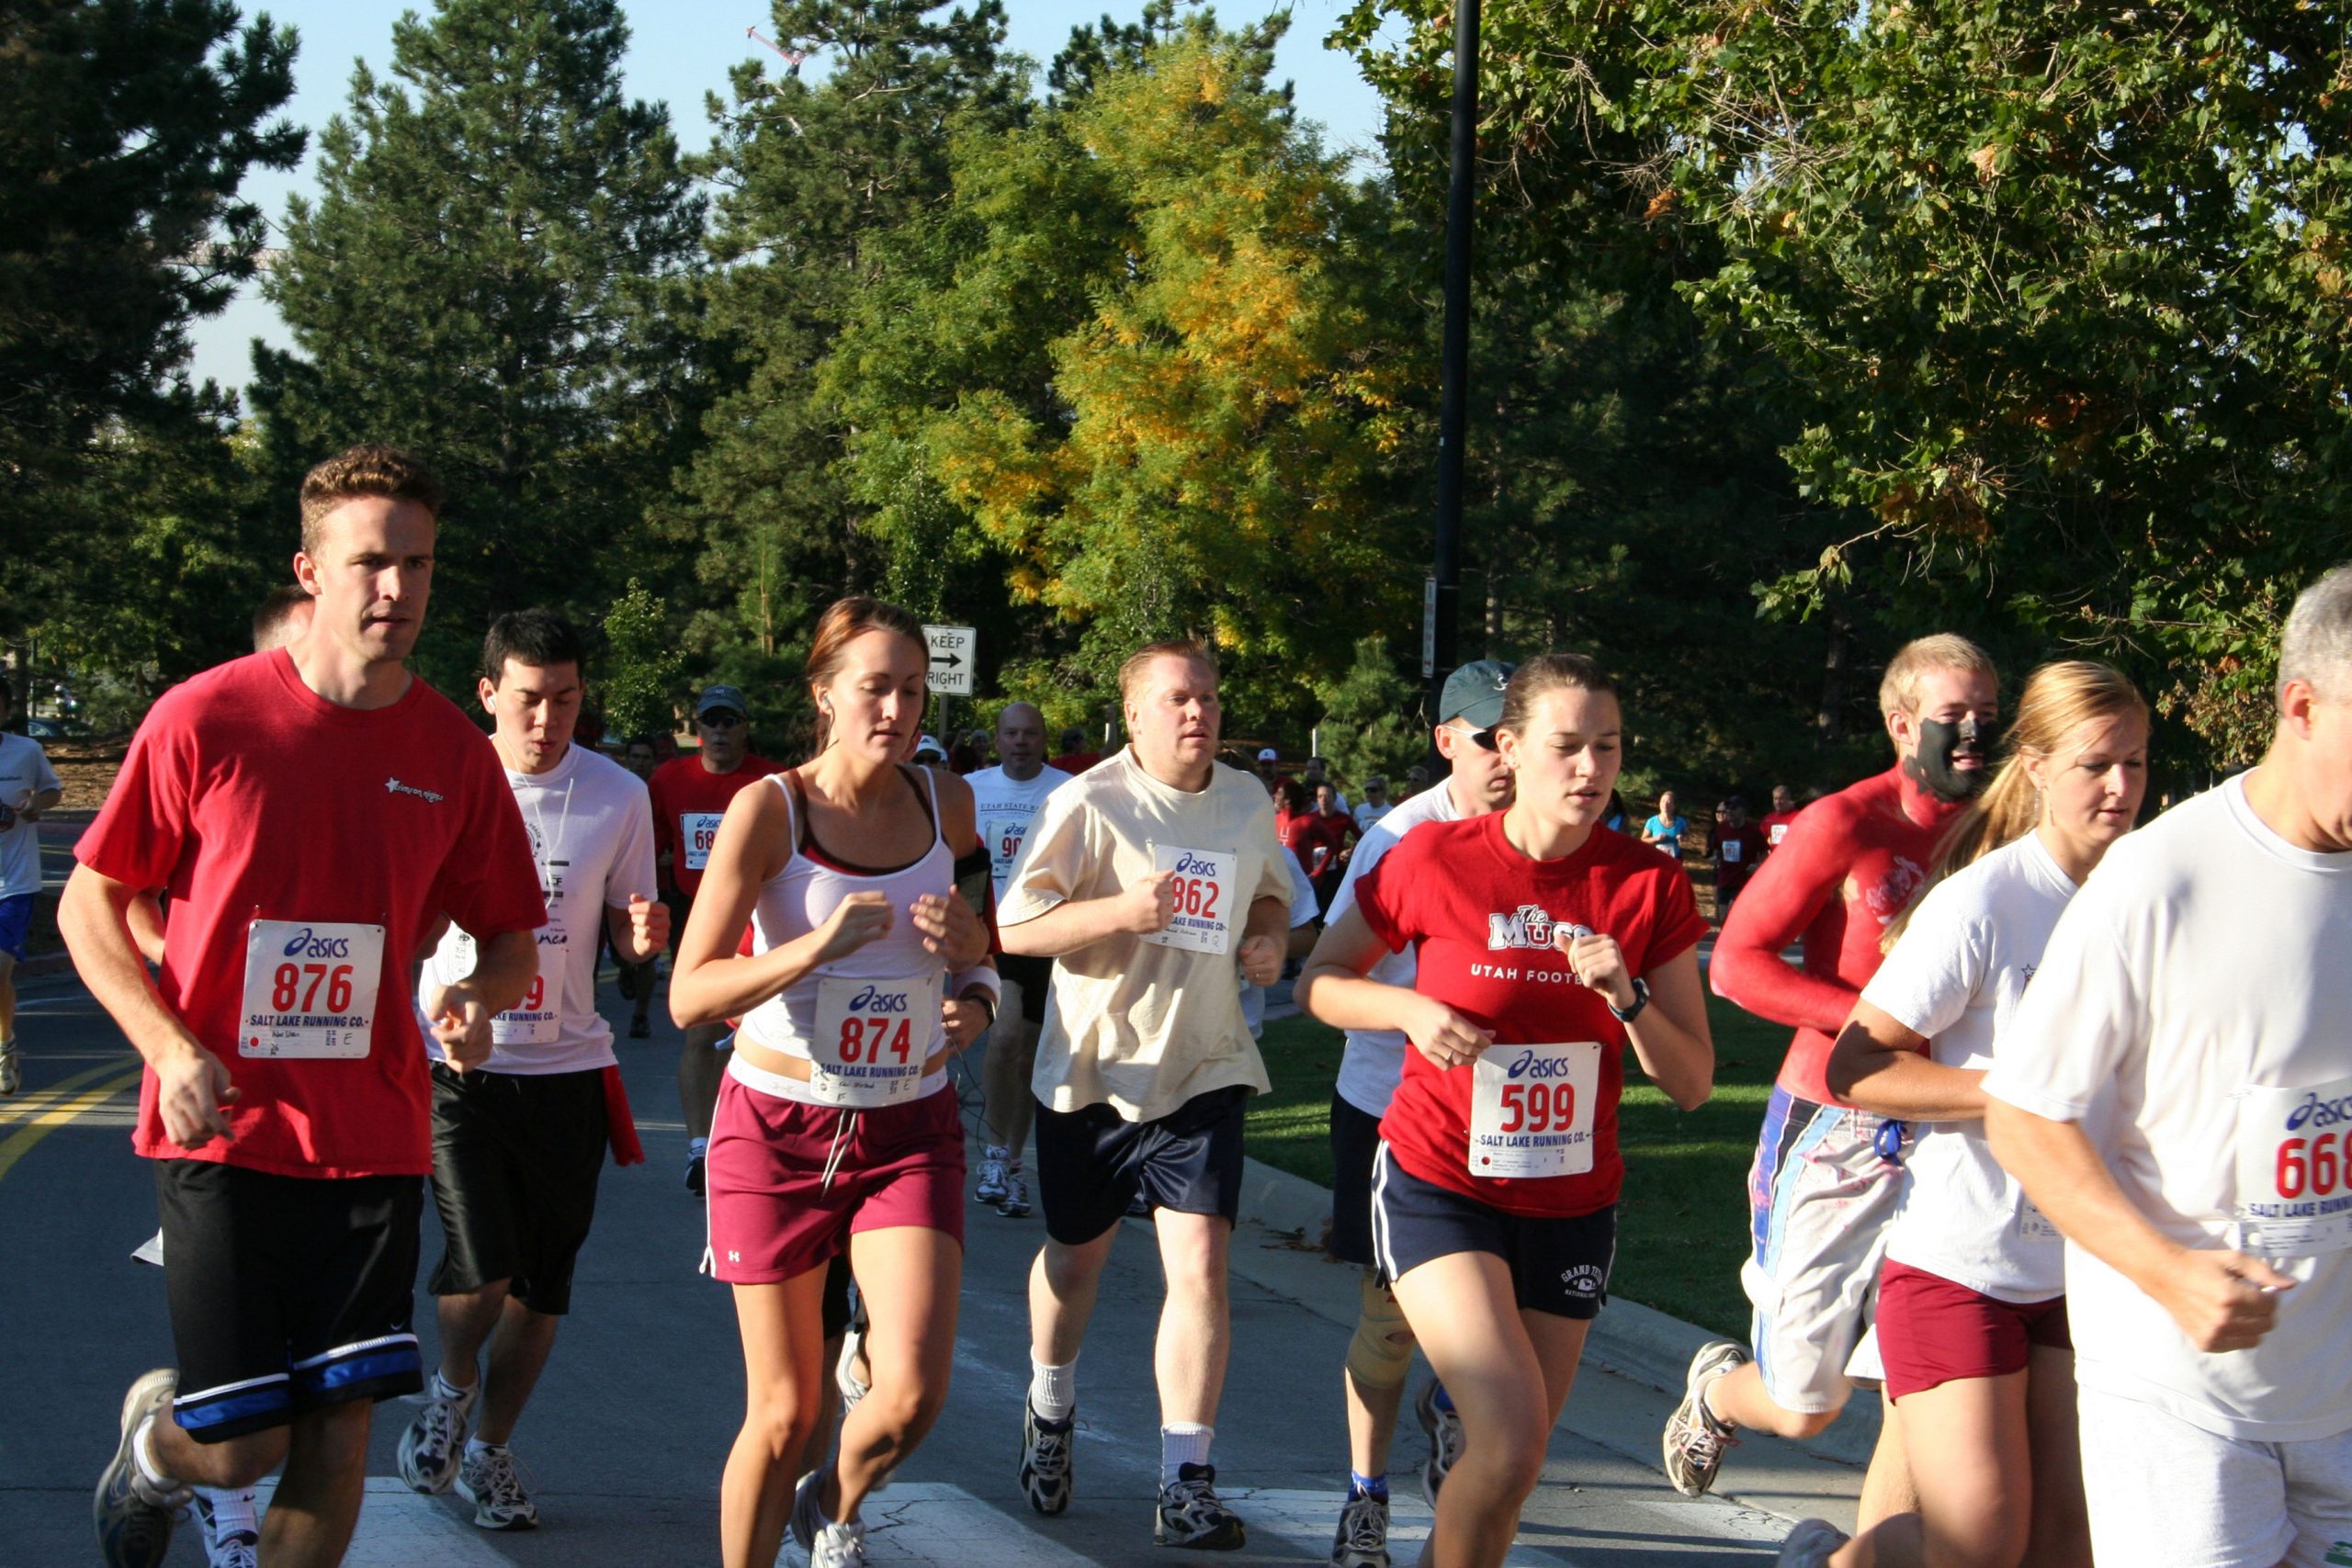 On Saturday, Homecoming Day, runners of all ages will gather at the Alumni House, beginning at 8 a.m., for the ever popular 5K Run/Walk/Stroll, followed by the second annual Kids K Fun Run, guaranteeing a good time for the entire family.